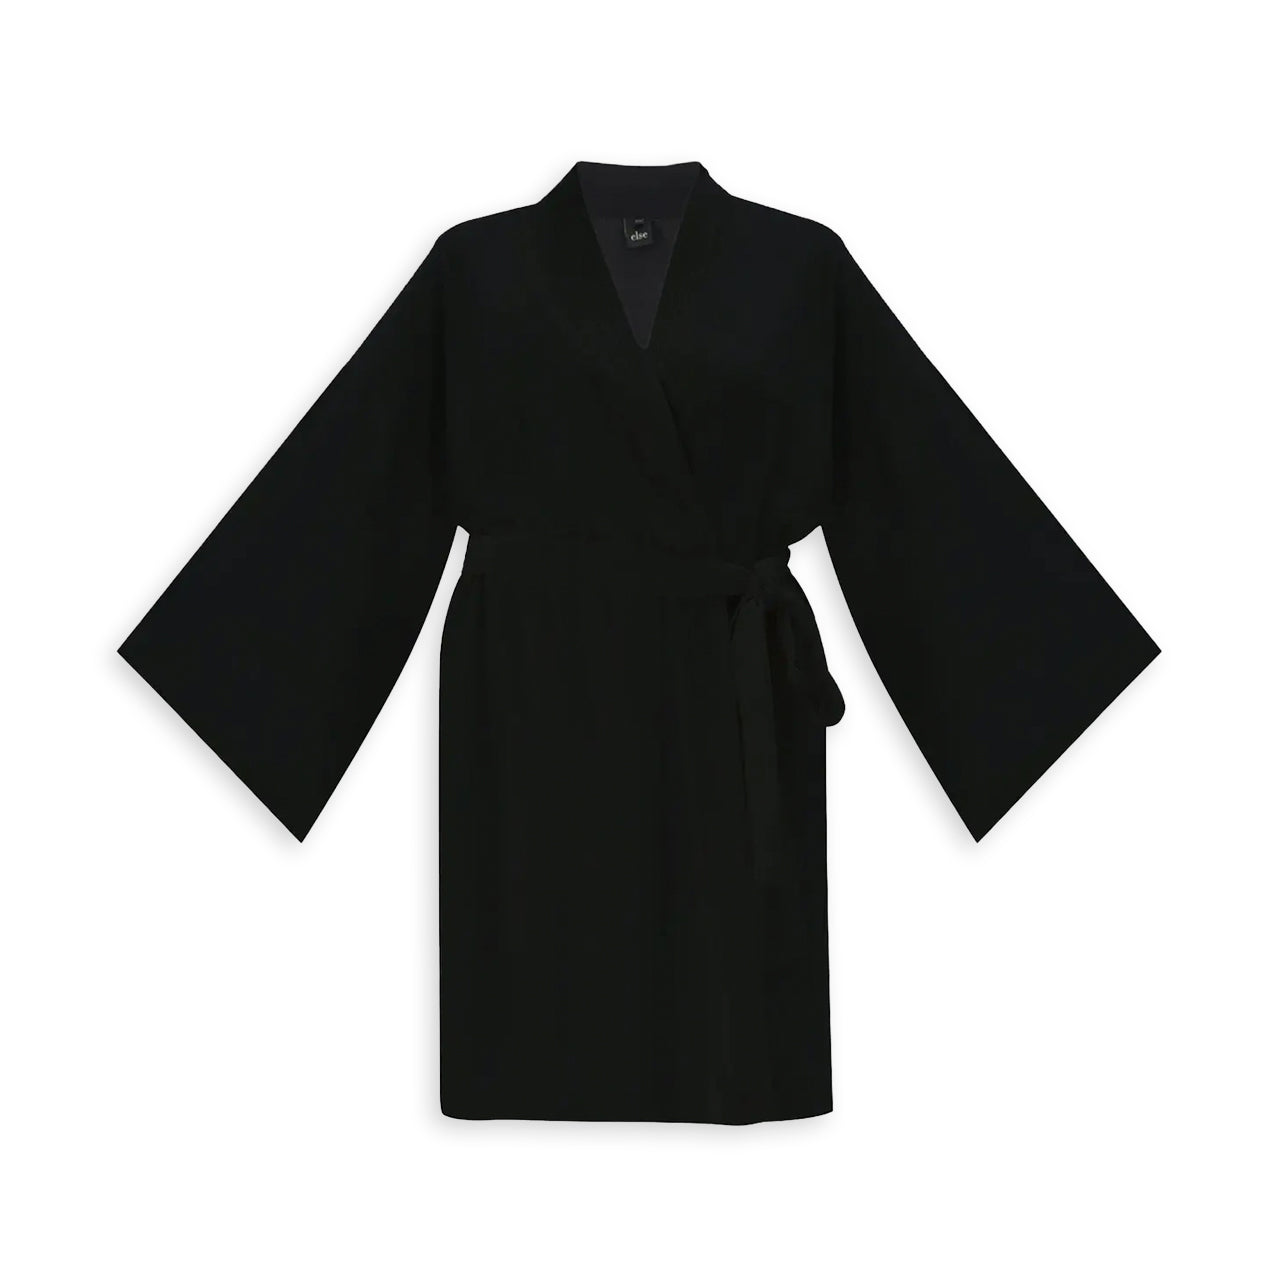 Else Lingerie Diana Robe | Uncrate Supply